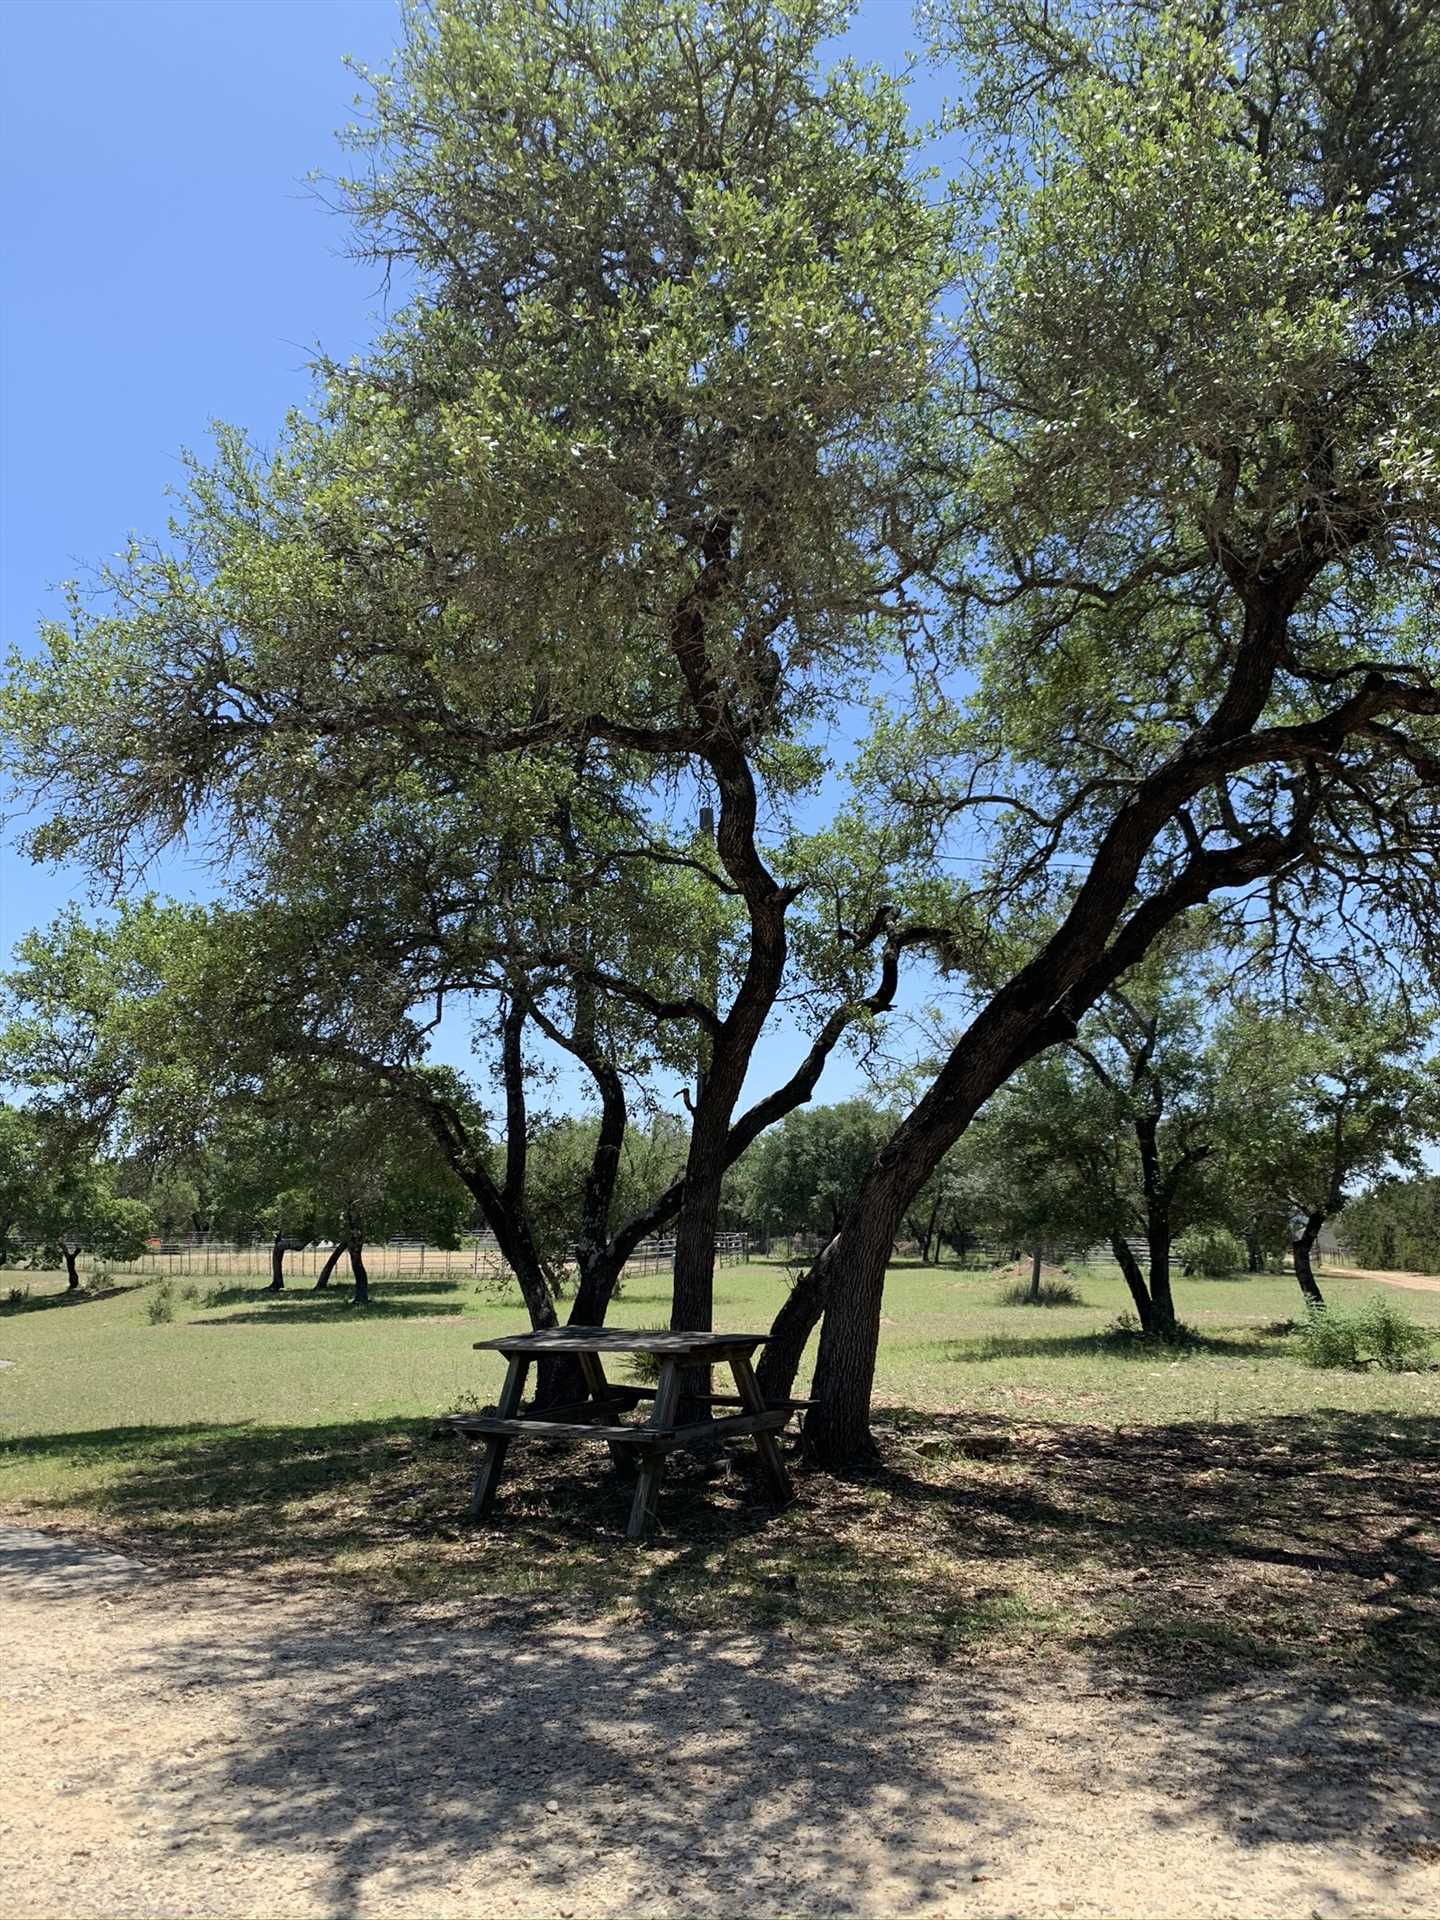                                                 Imagine a country picnic in the shade, with soft Hill Country breezes and twittering birds as your background music!